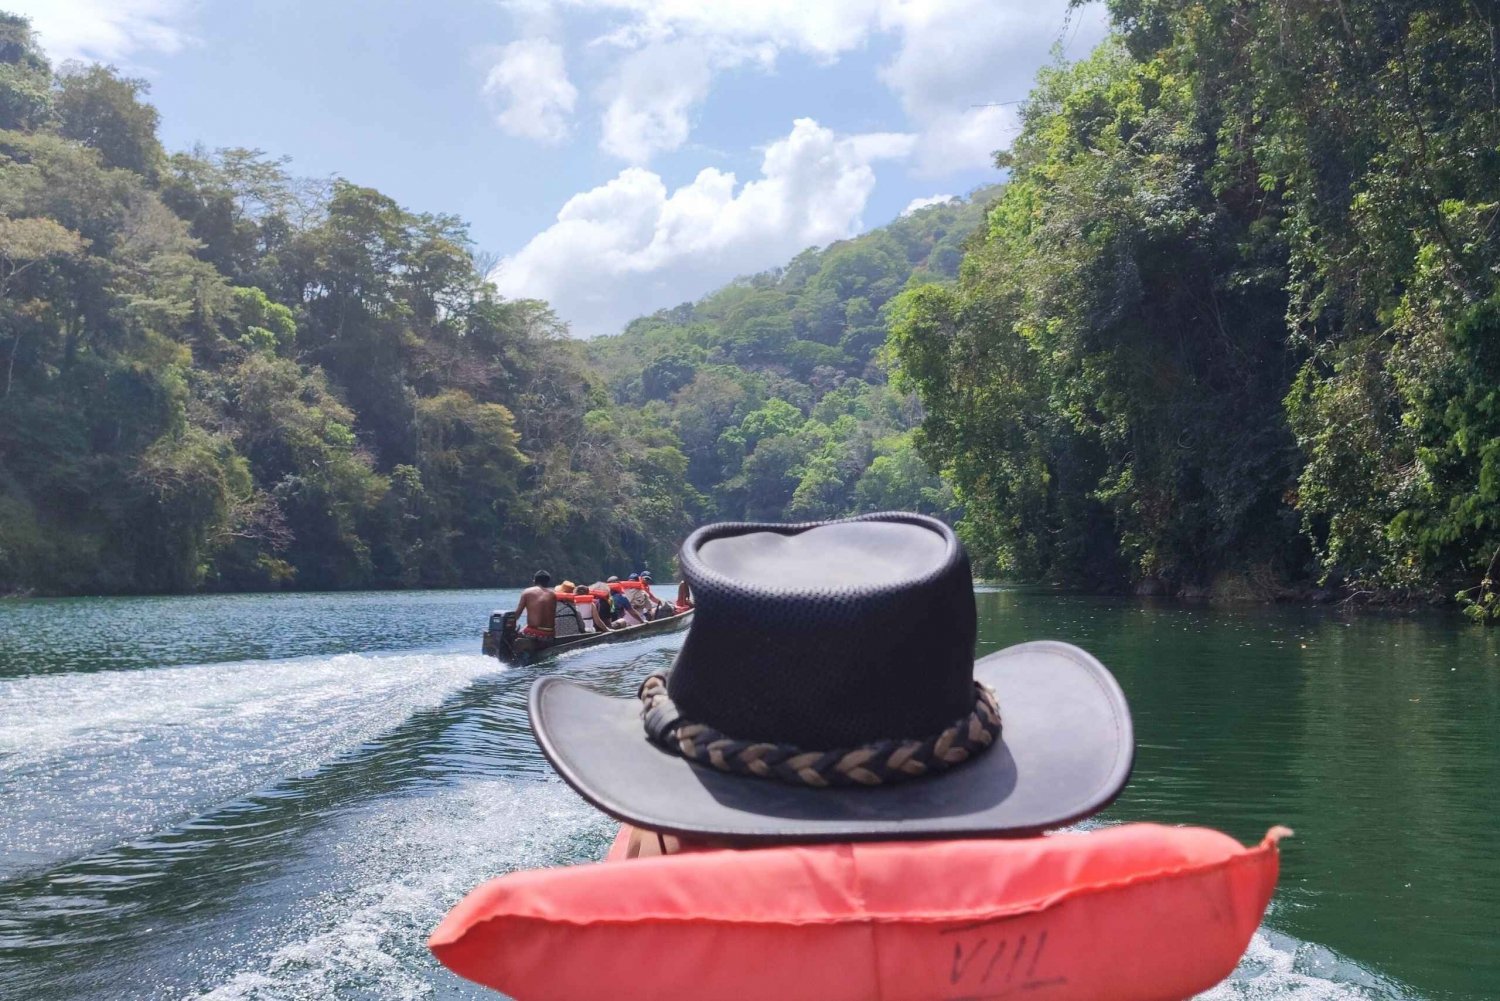 Panama City: Embera Indigenous Tribe & River Tour with Lunch